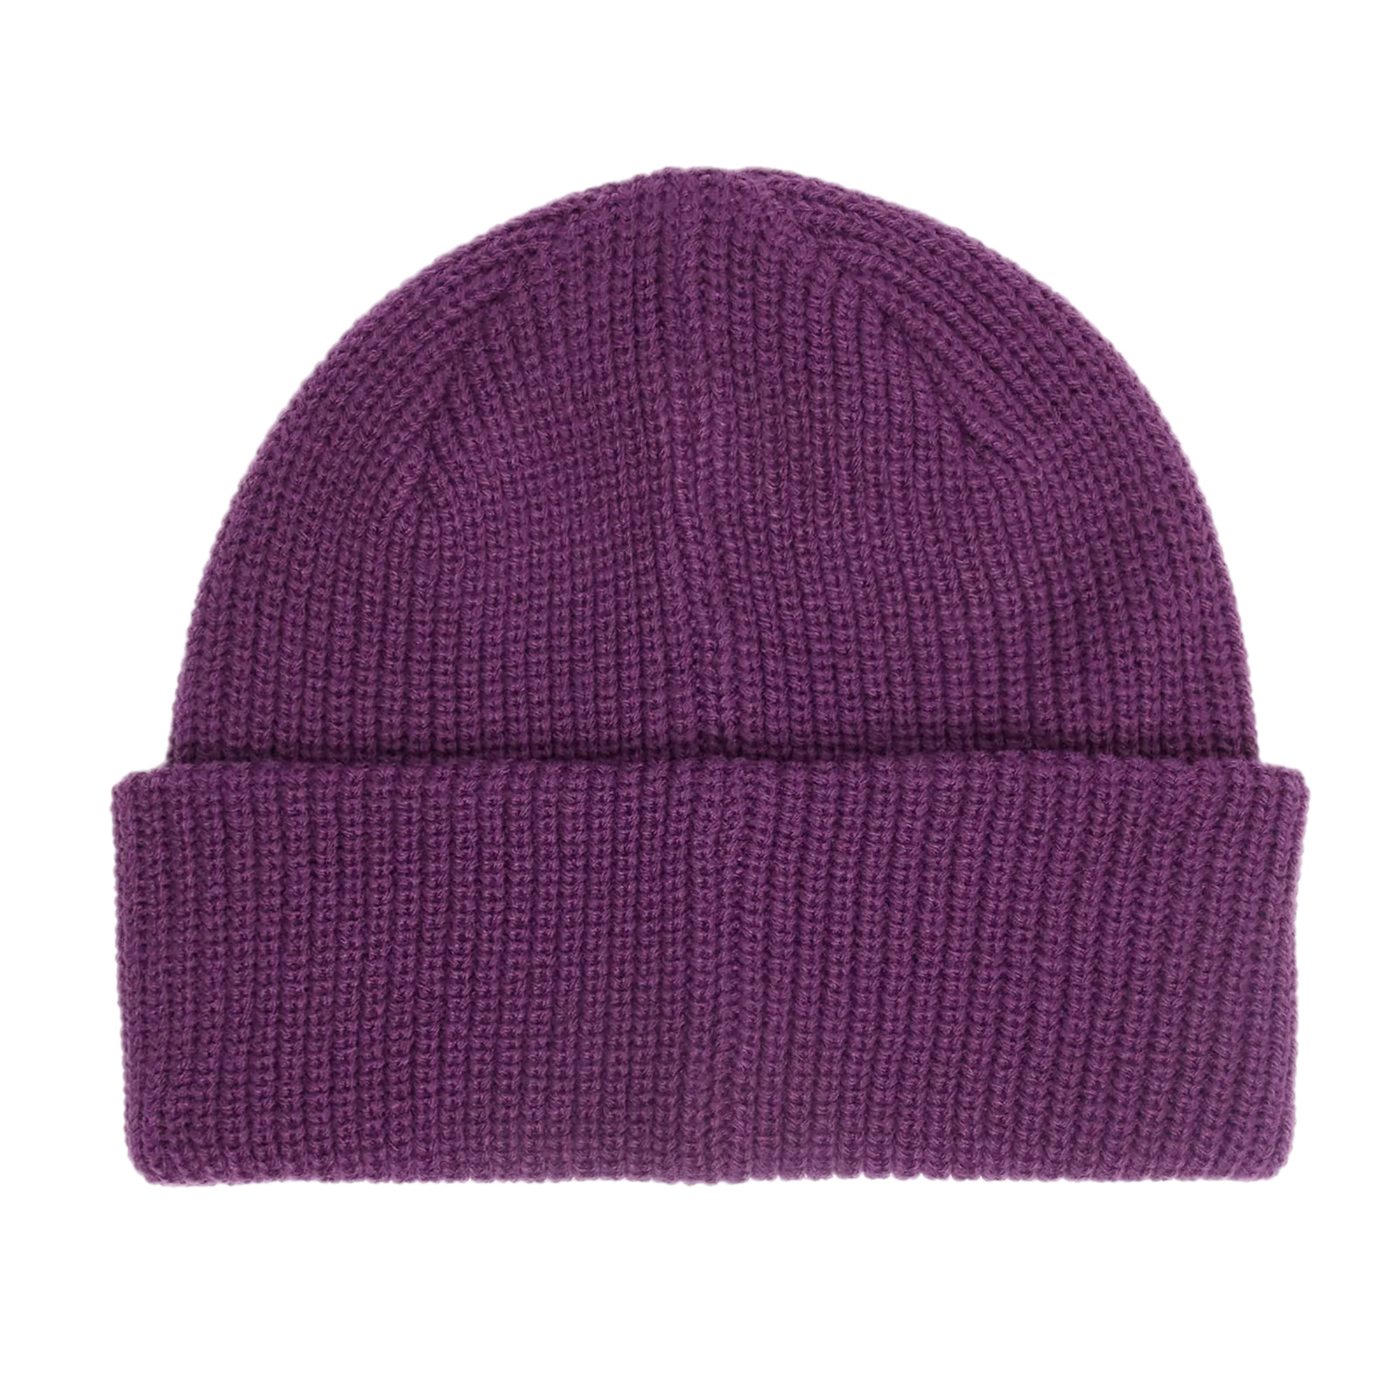 Obey Future Beanie - Wineberry